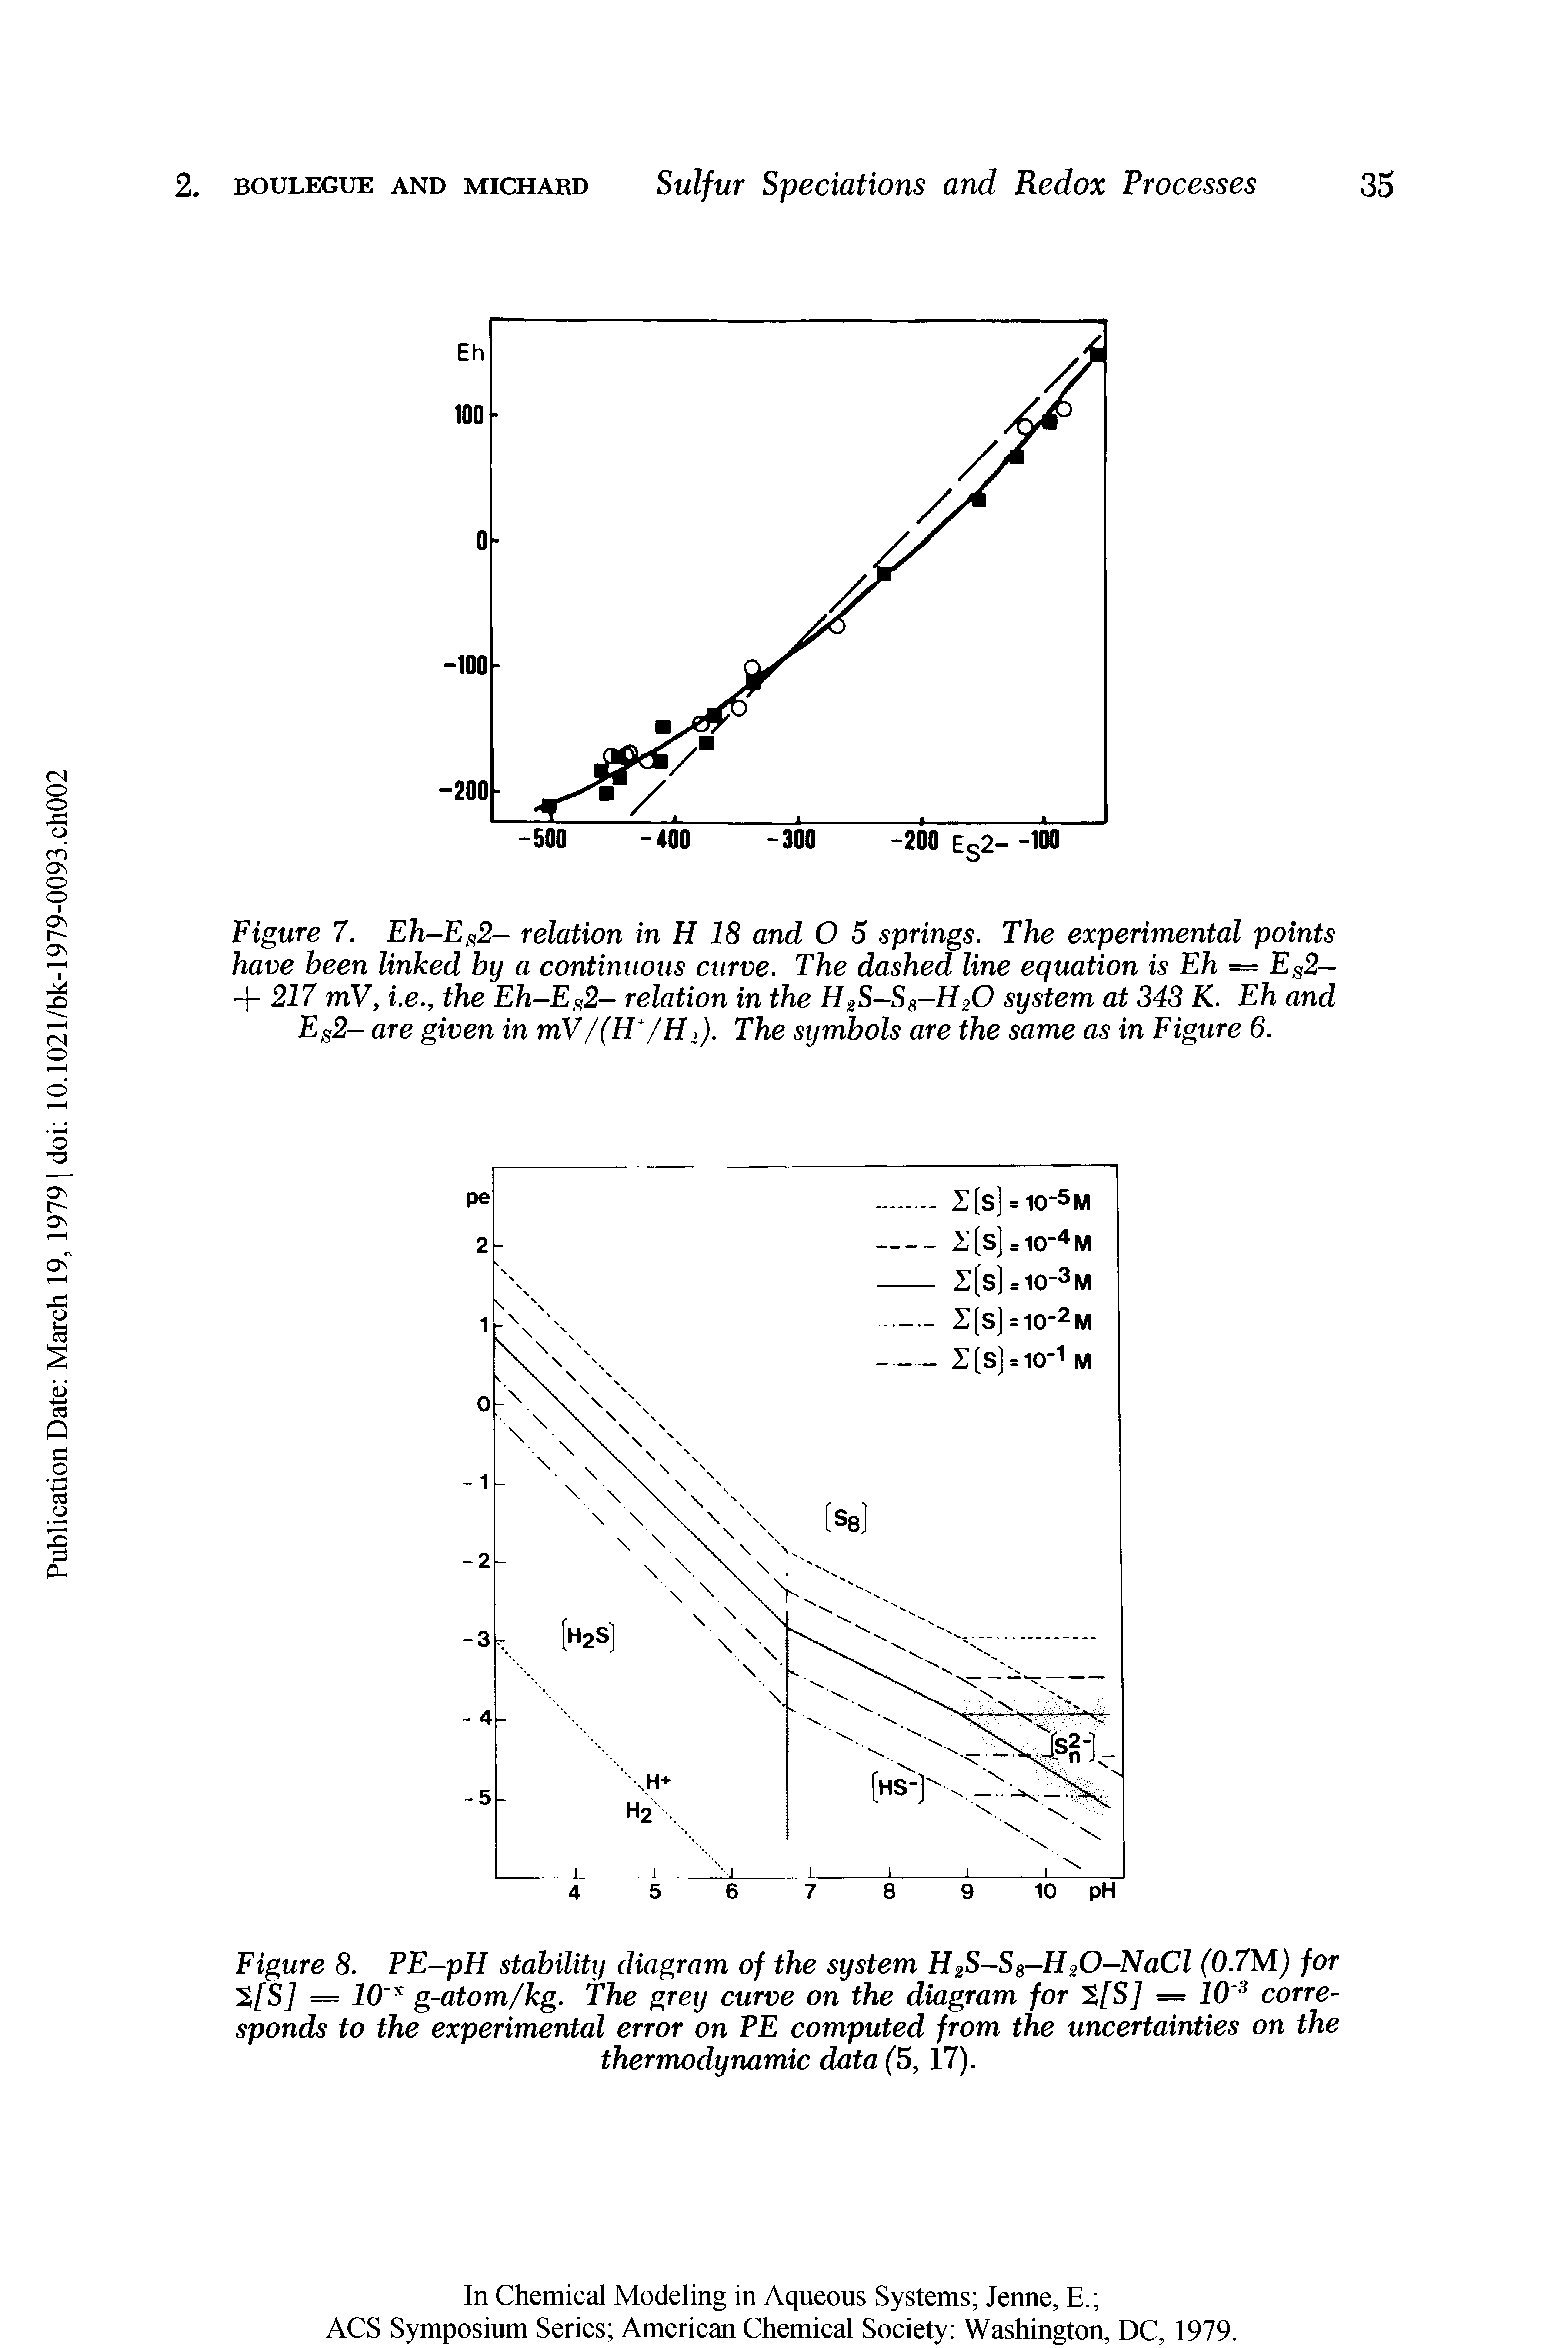 Figure 8. PE-pH stability diagram of the system H2S-S8—H20-NaCl (0.7M) for " [S] = 10 g-atom/kg. The grey curve on the diagram for [S] = 10 corresponds to the experimental error on PE computed from the uncertainties on the thermodynamic data (5, 17).